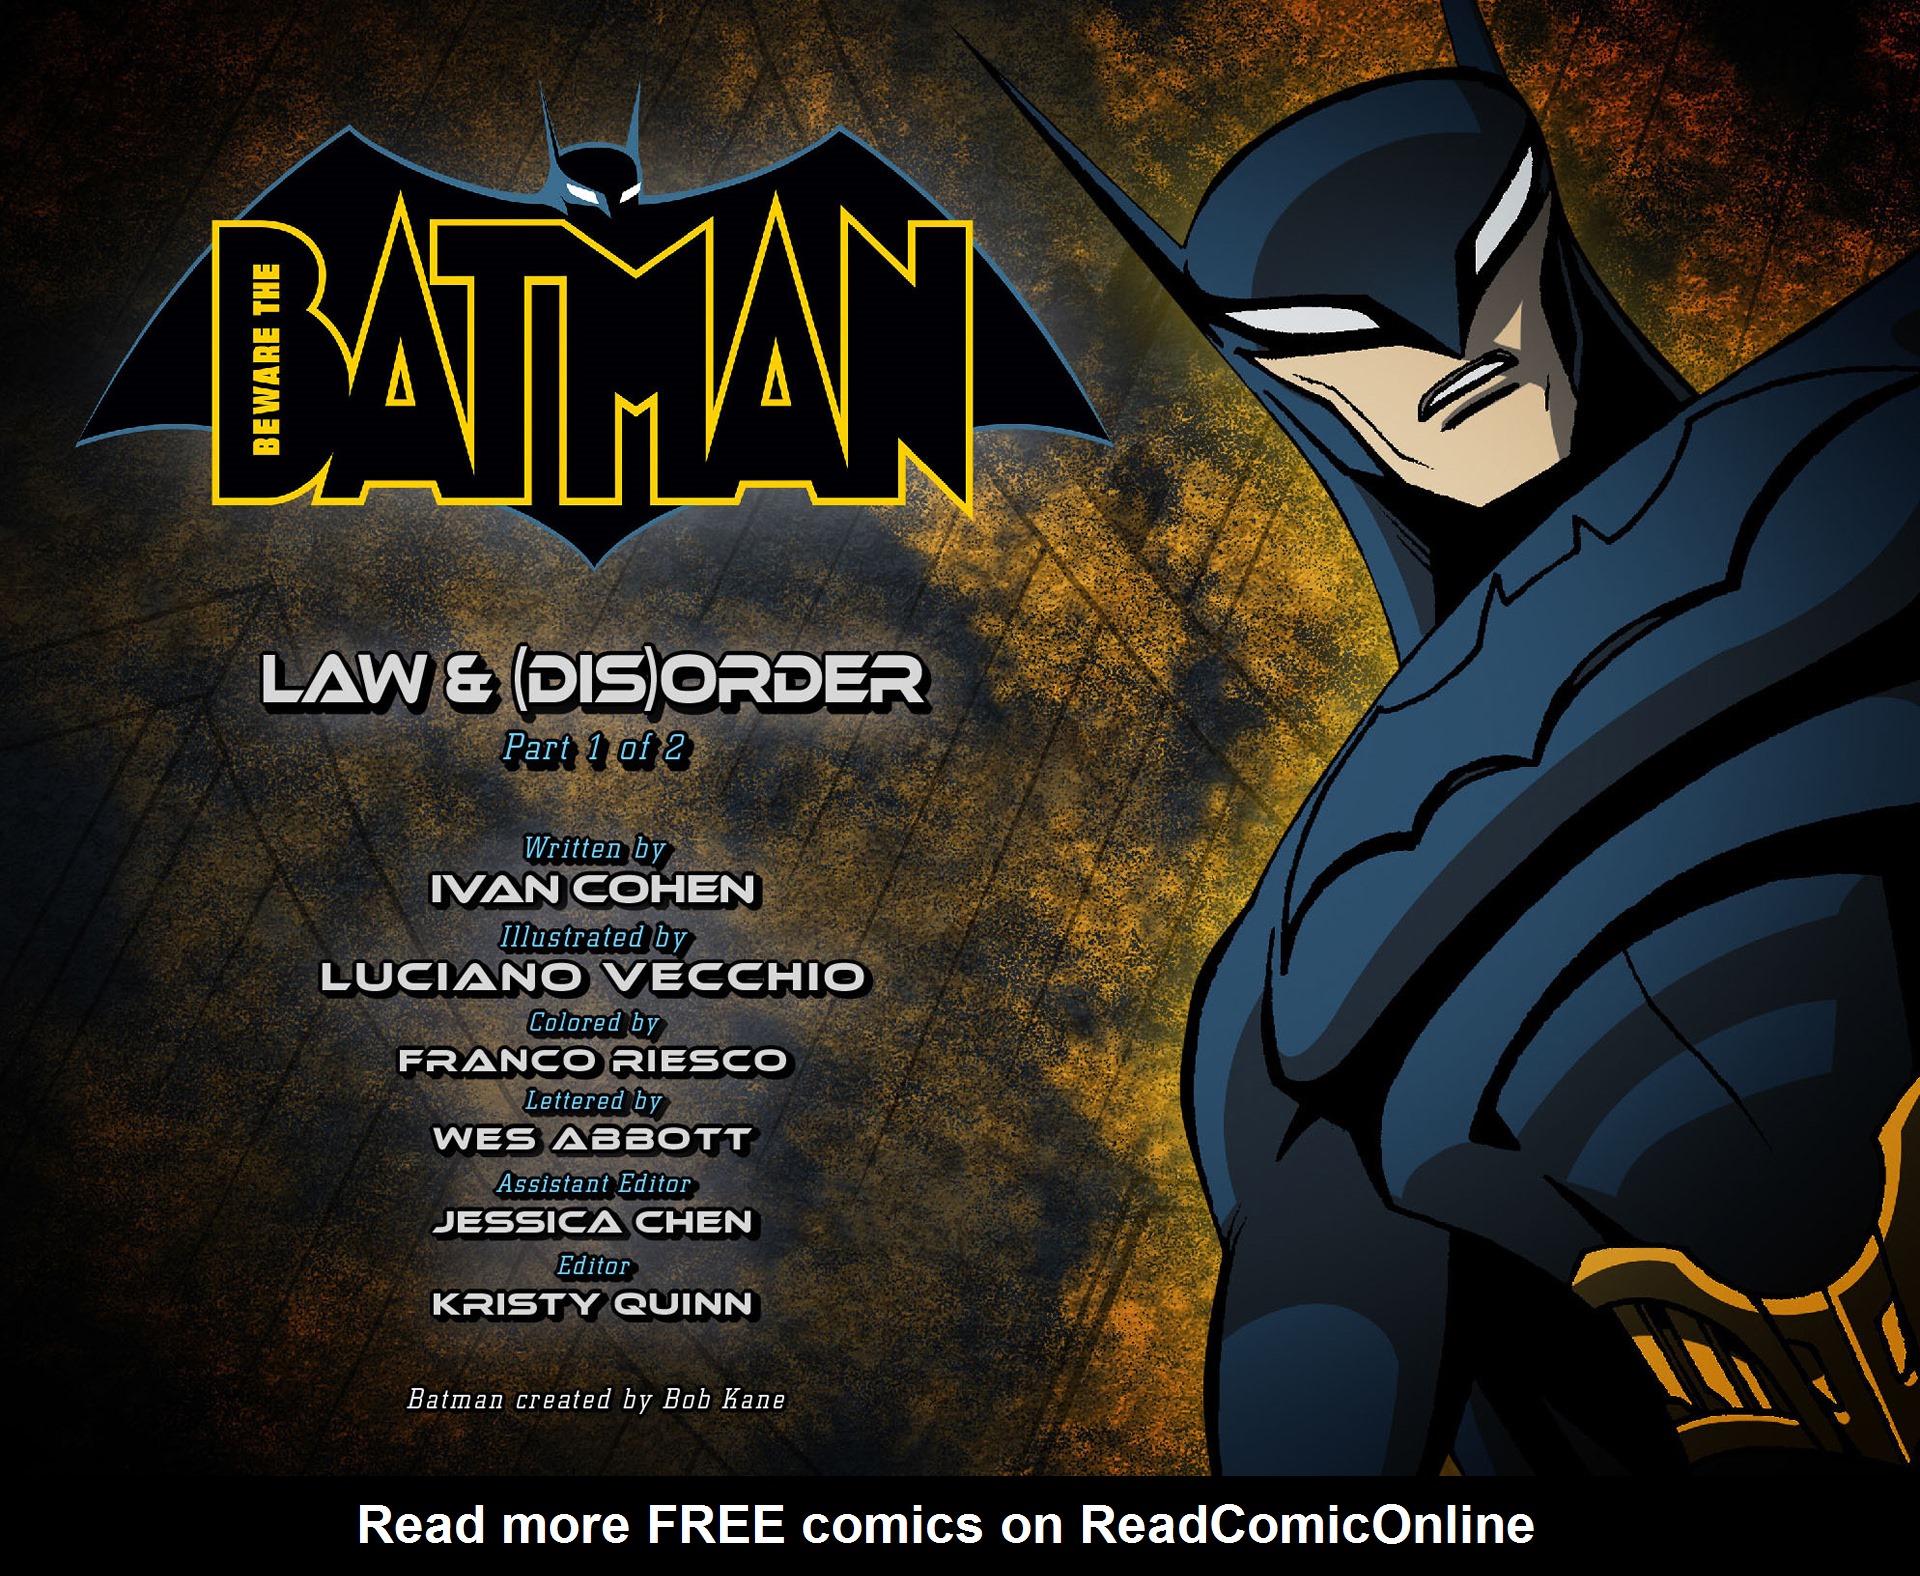 Beware The Batman I Issue 1 | Read Beware The Batman I Issue 1 comic online  in high quality. Read Full Comic online for free - Read comics online in  high quality .|